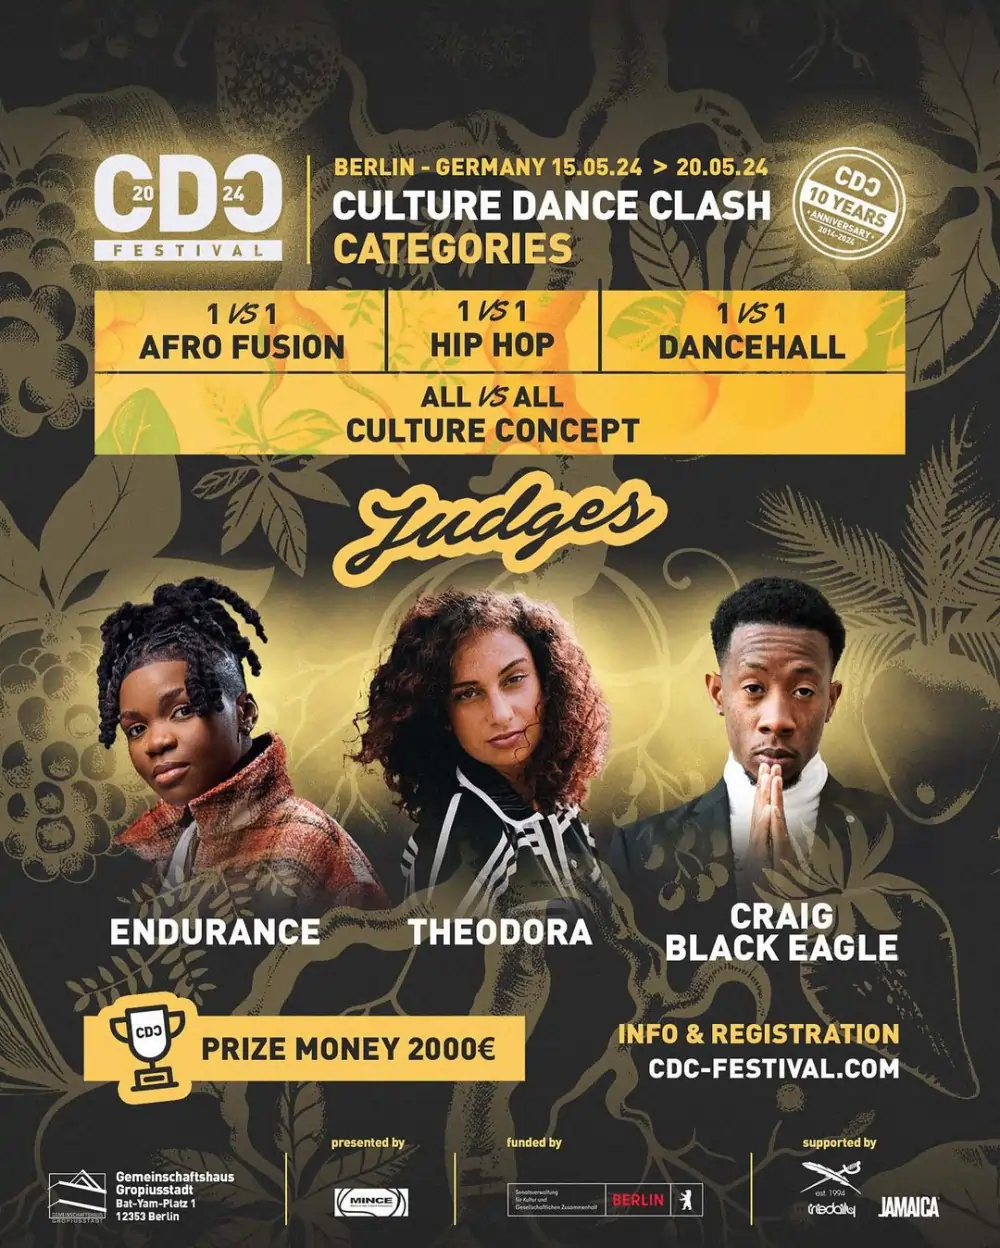 Endurance Grand to represent Ghana at Culture Dance Clash Festival in Germany